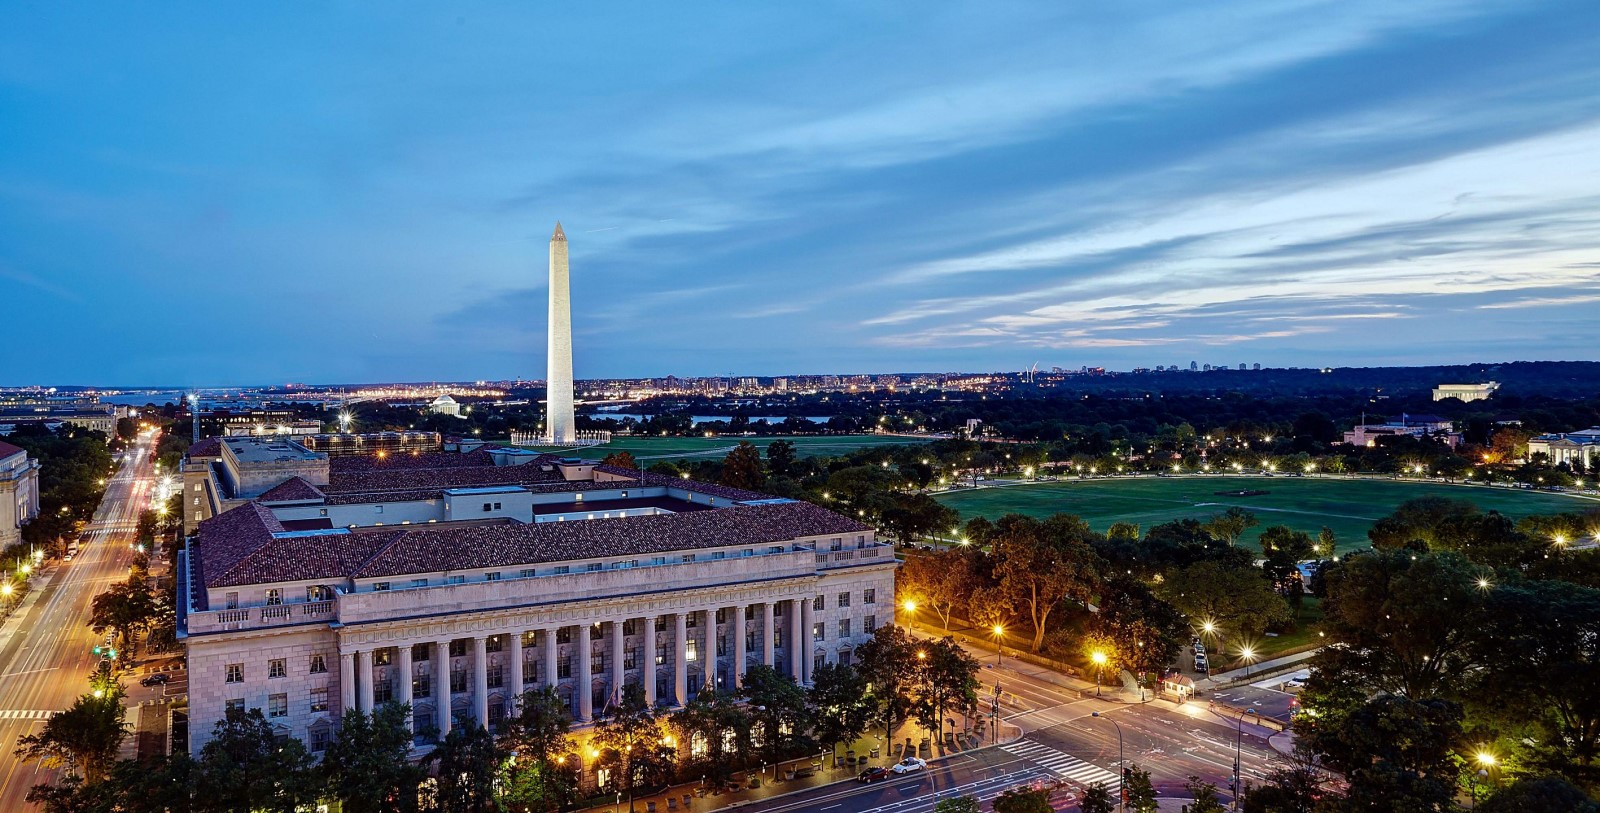 Experience the White House, the Washington Monument, the Franklin Delano Roosevelt Memorial, and the National Mall just moments away.